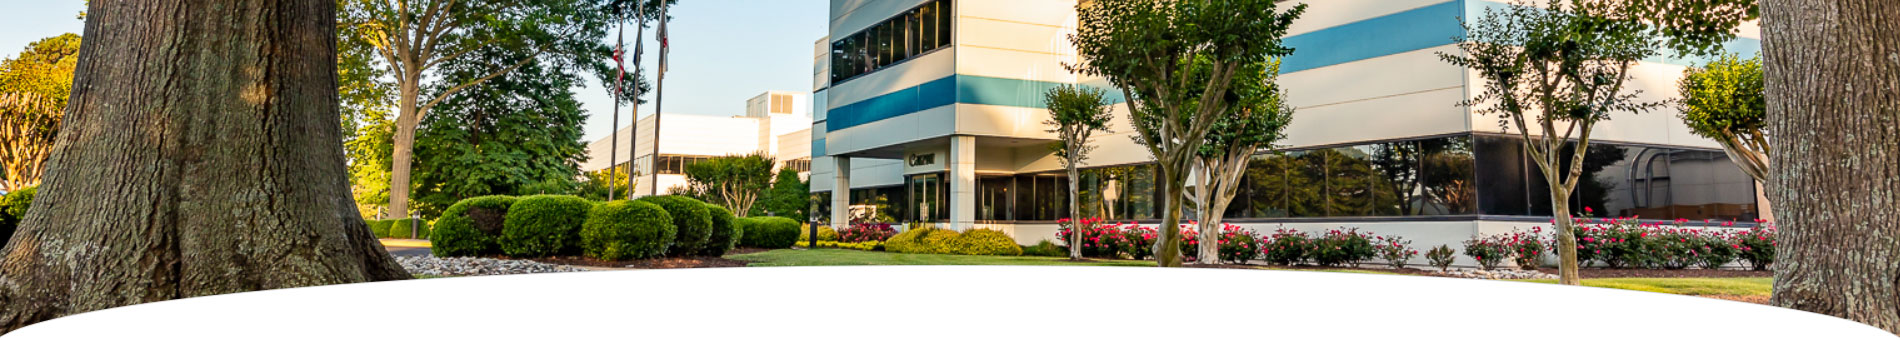 Image of a Canon office building near trees